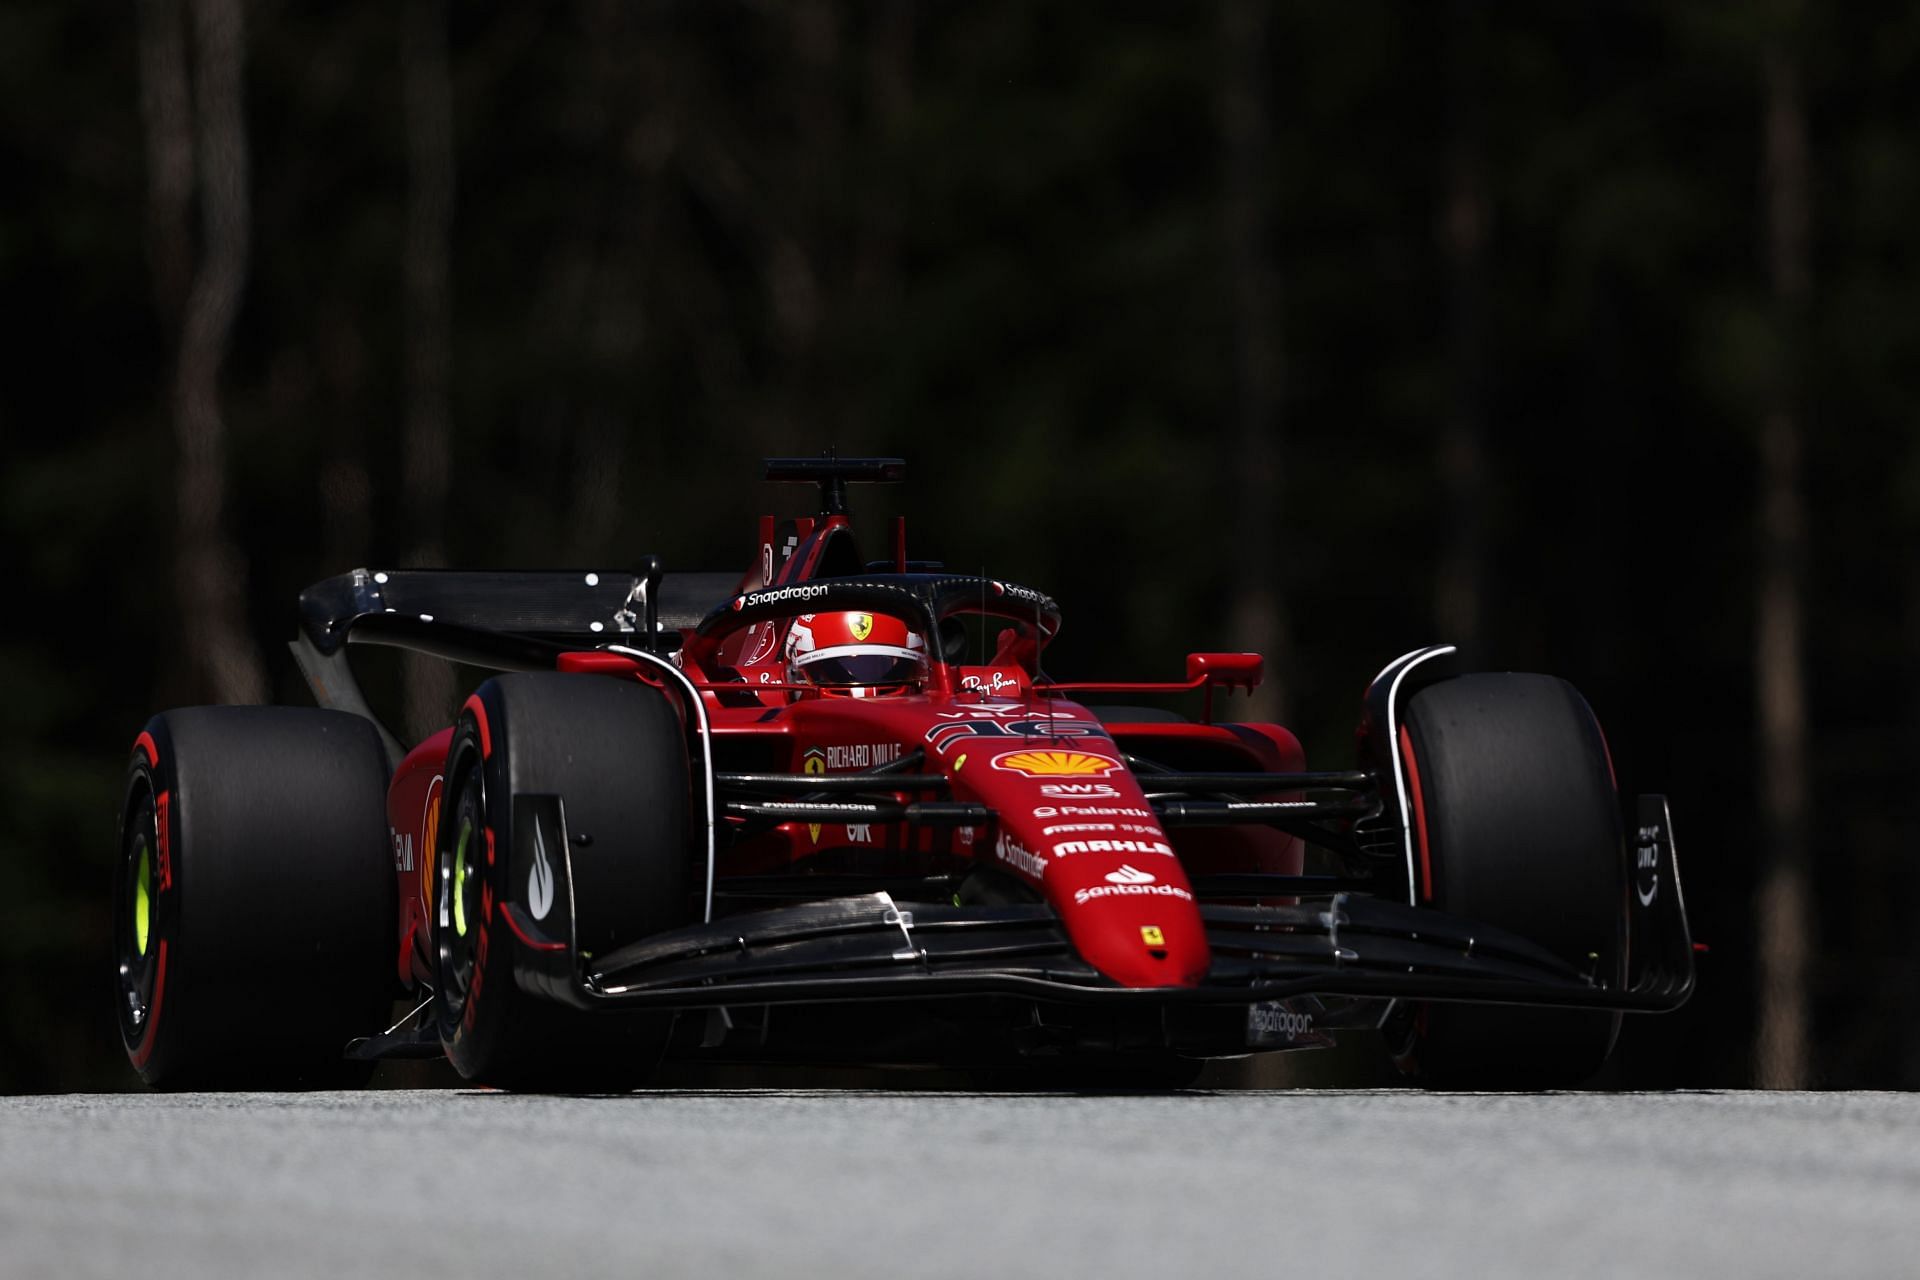 Ferrari driver Charles Leclerc in action during qualifying for the 2022 F1 Austrian GP. (Photo by Bryn Lennon/Getty Images)